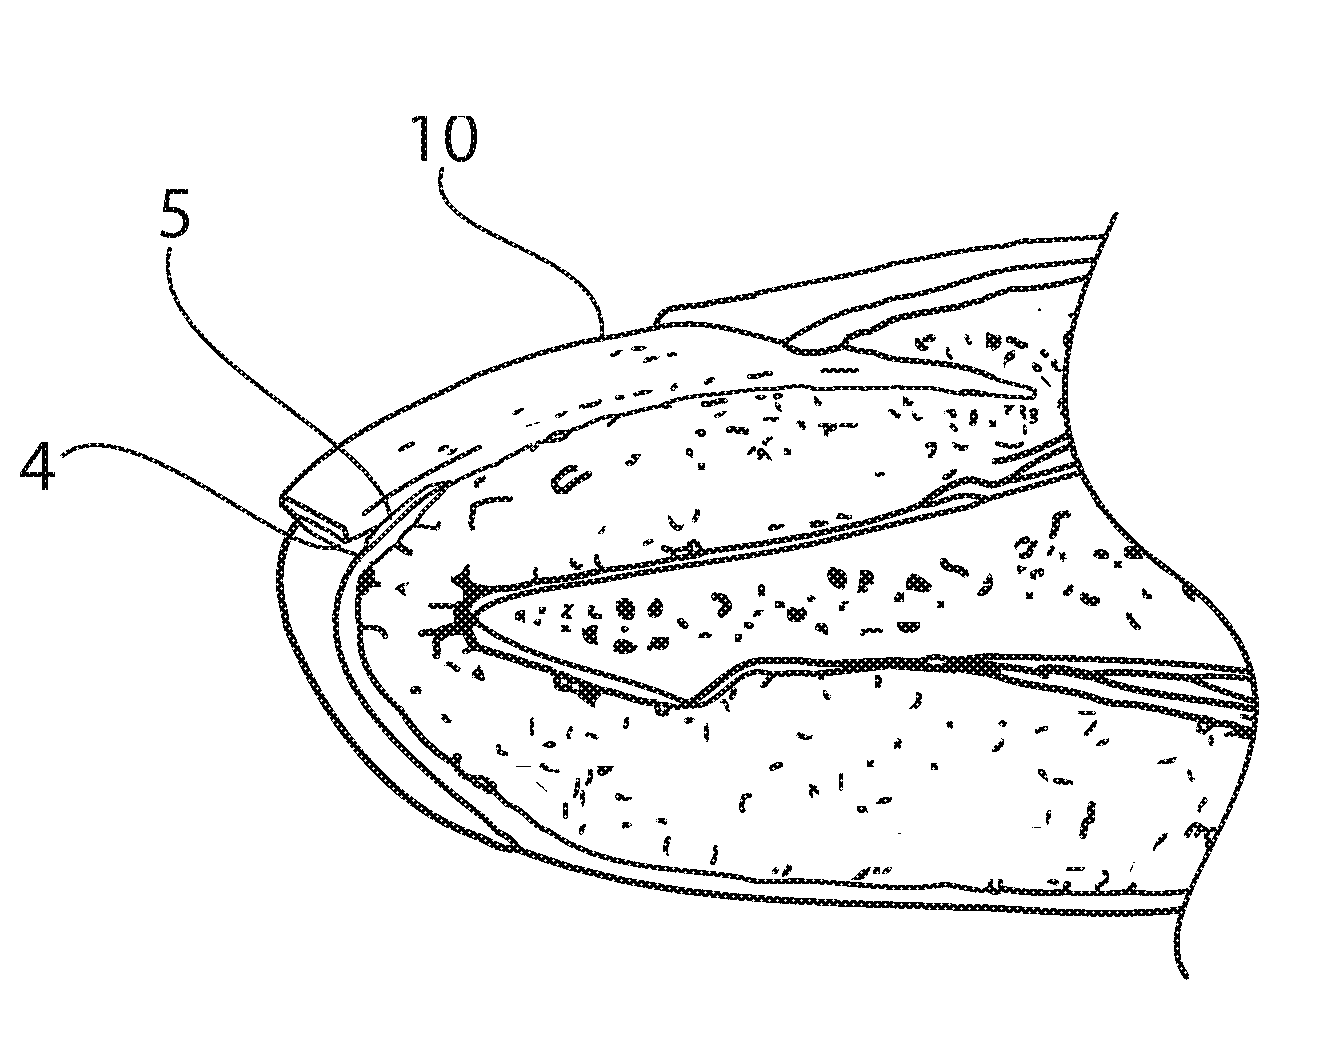 Method and Device for the Cleaning and Medical Treatment of Extremities